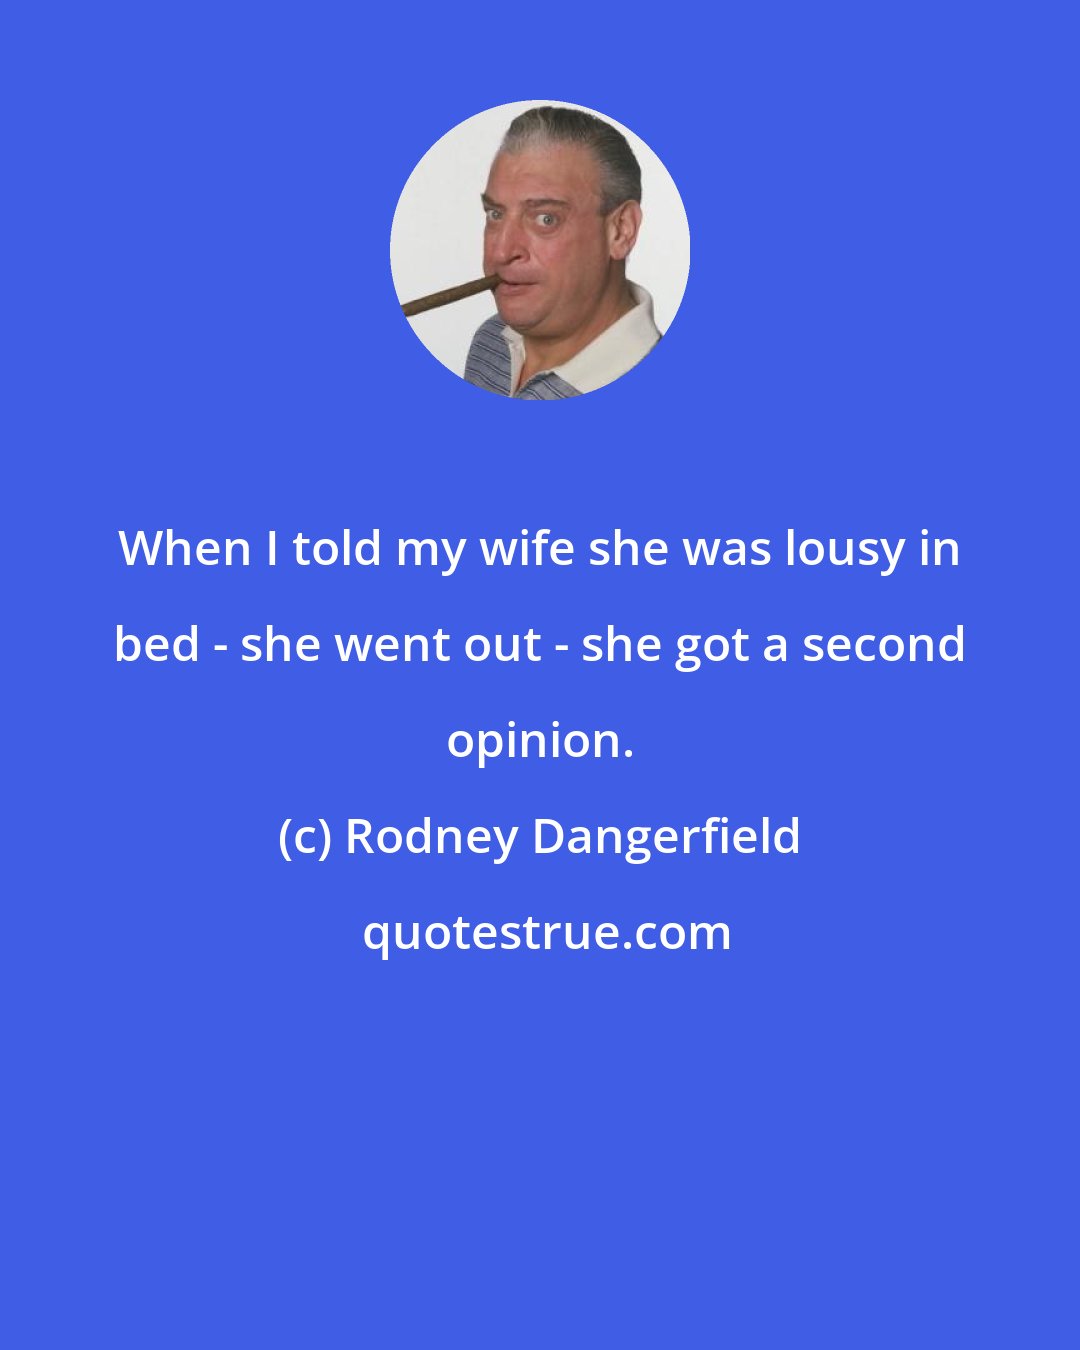 Rodney Dangerfield: When I told my wife she was lousy in bed - she went out - she got a second opinion.